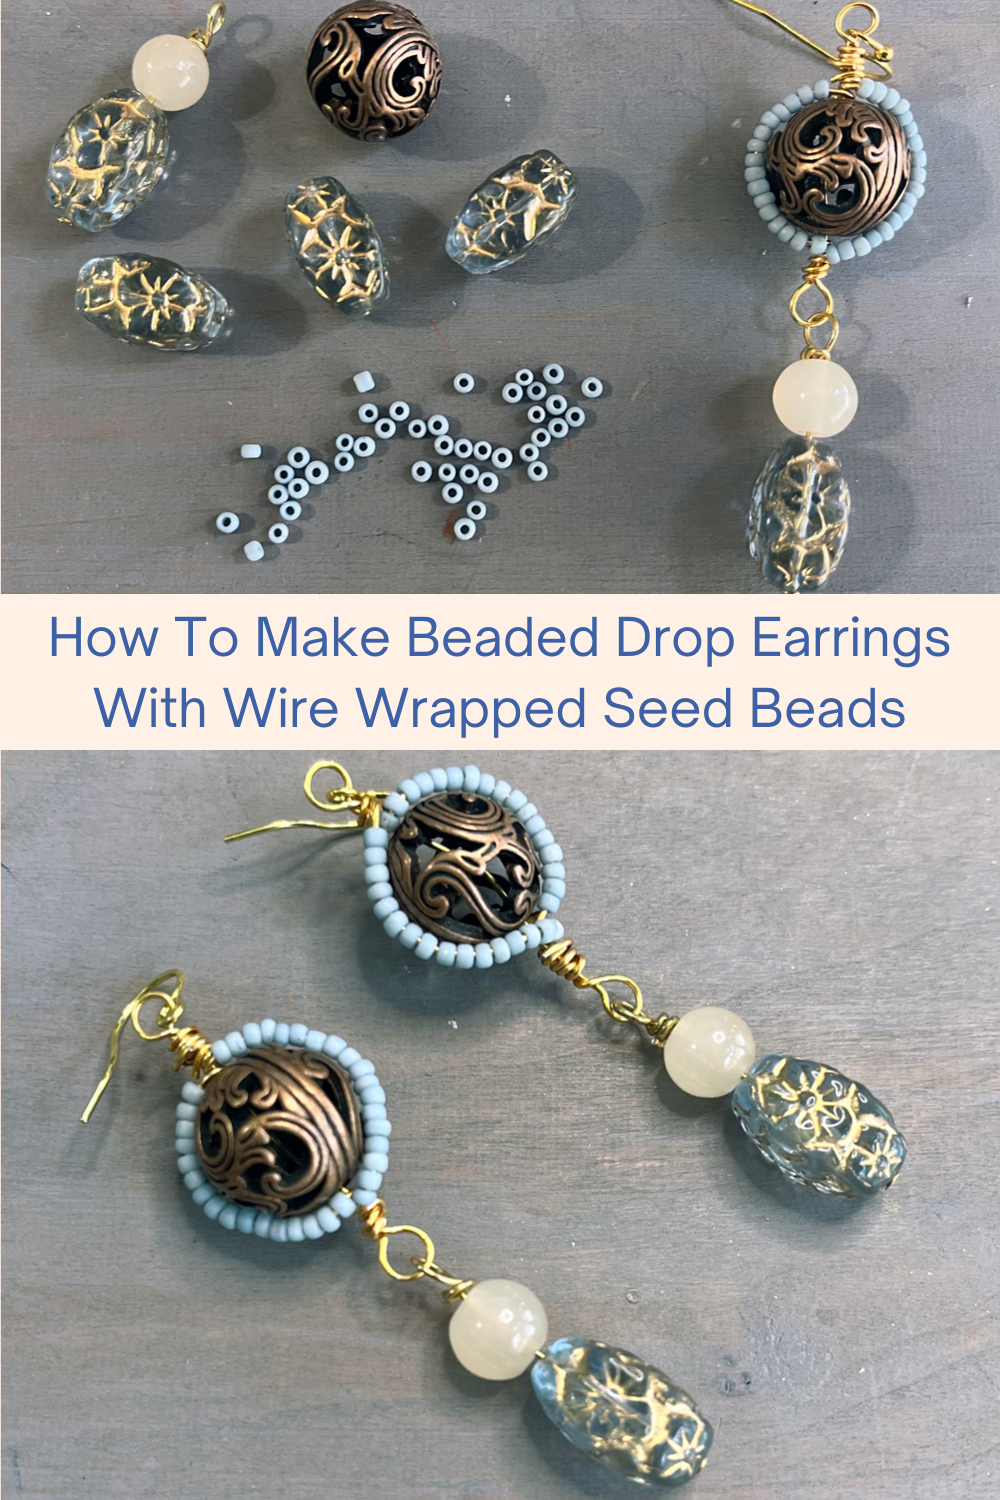 How To Make Beaded Drop Earrings With Wire Wrapped Seed Beads Collage